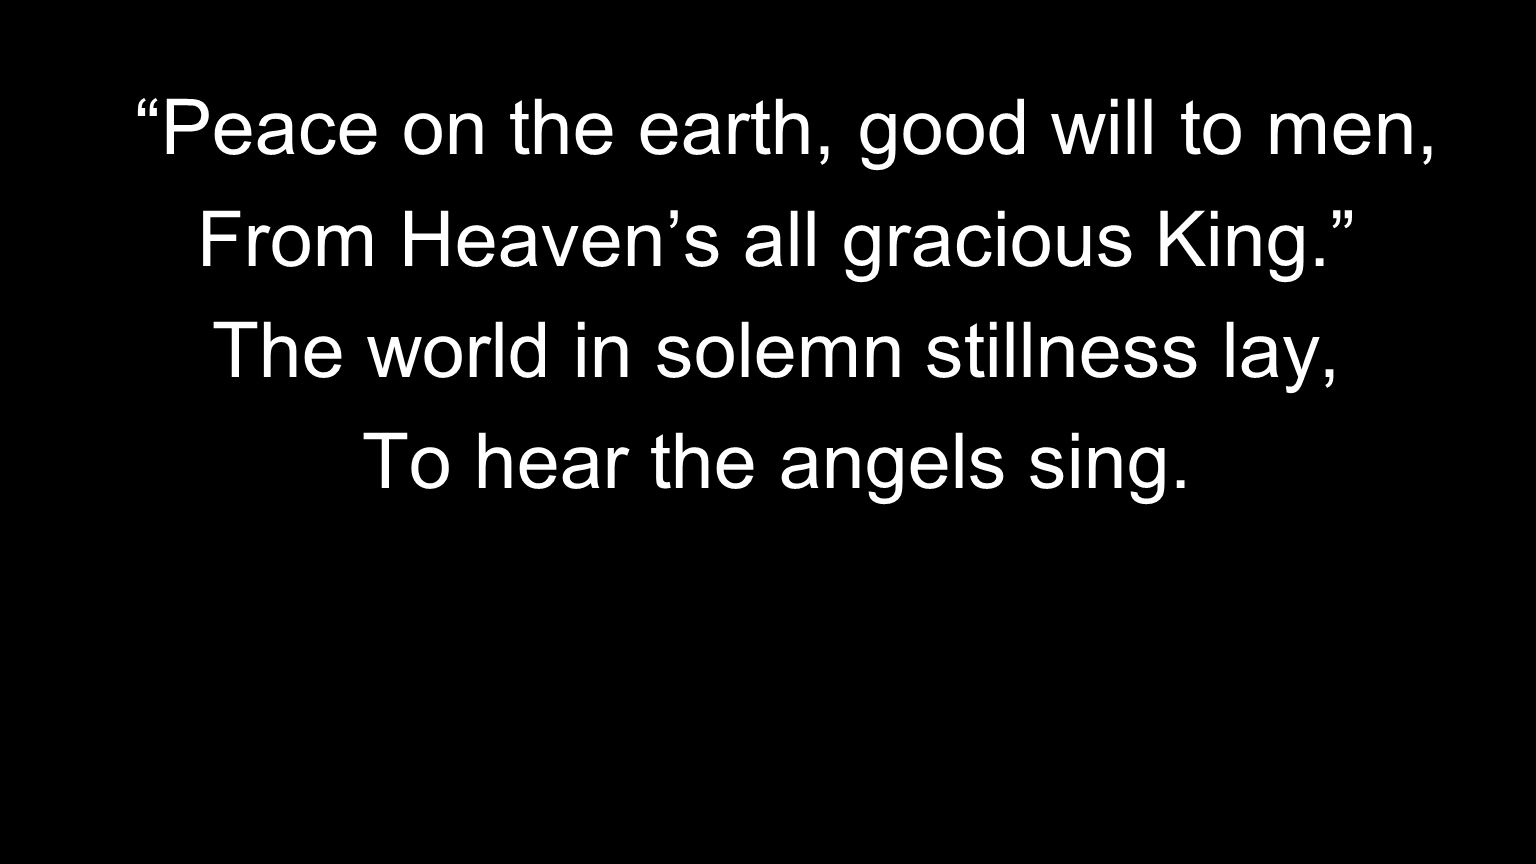 Peace on the earth, good will to men, From Heaven’s all gracious King. The world in solemn stillness lay, To hear the angels sing.